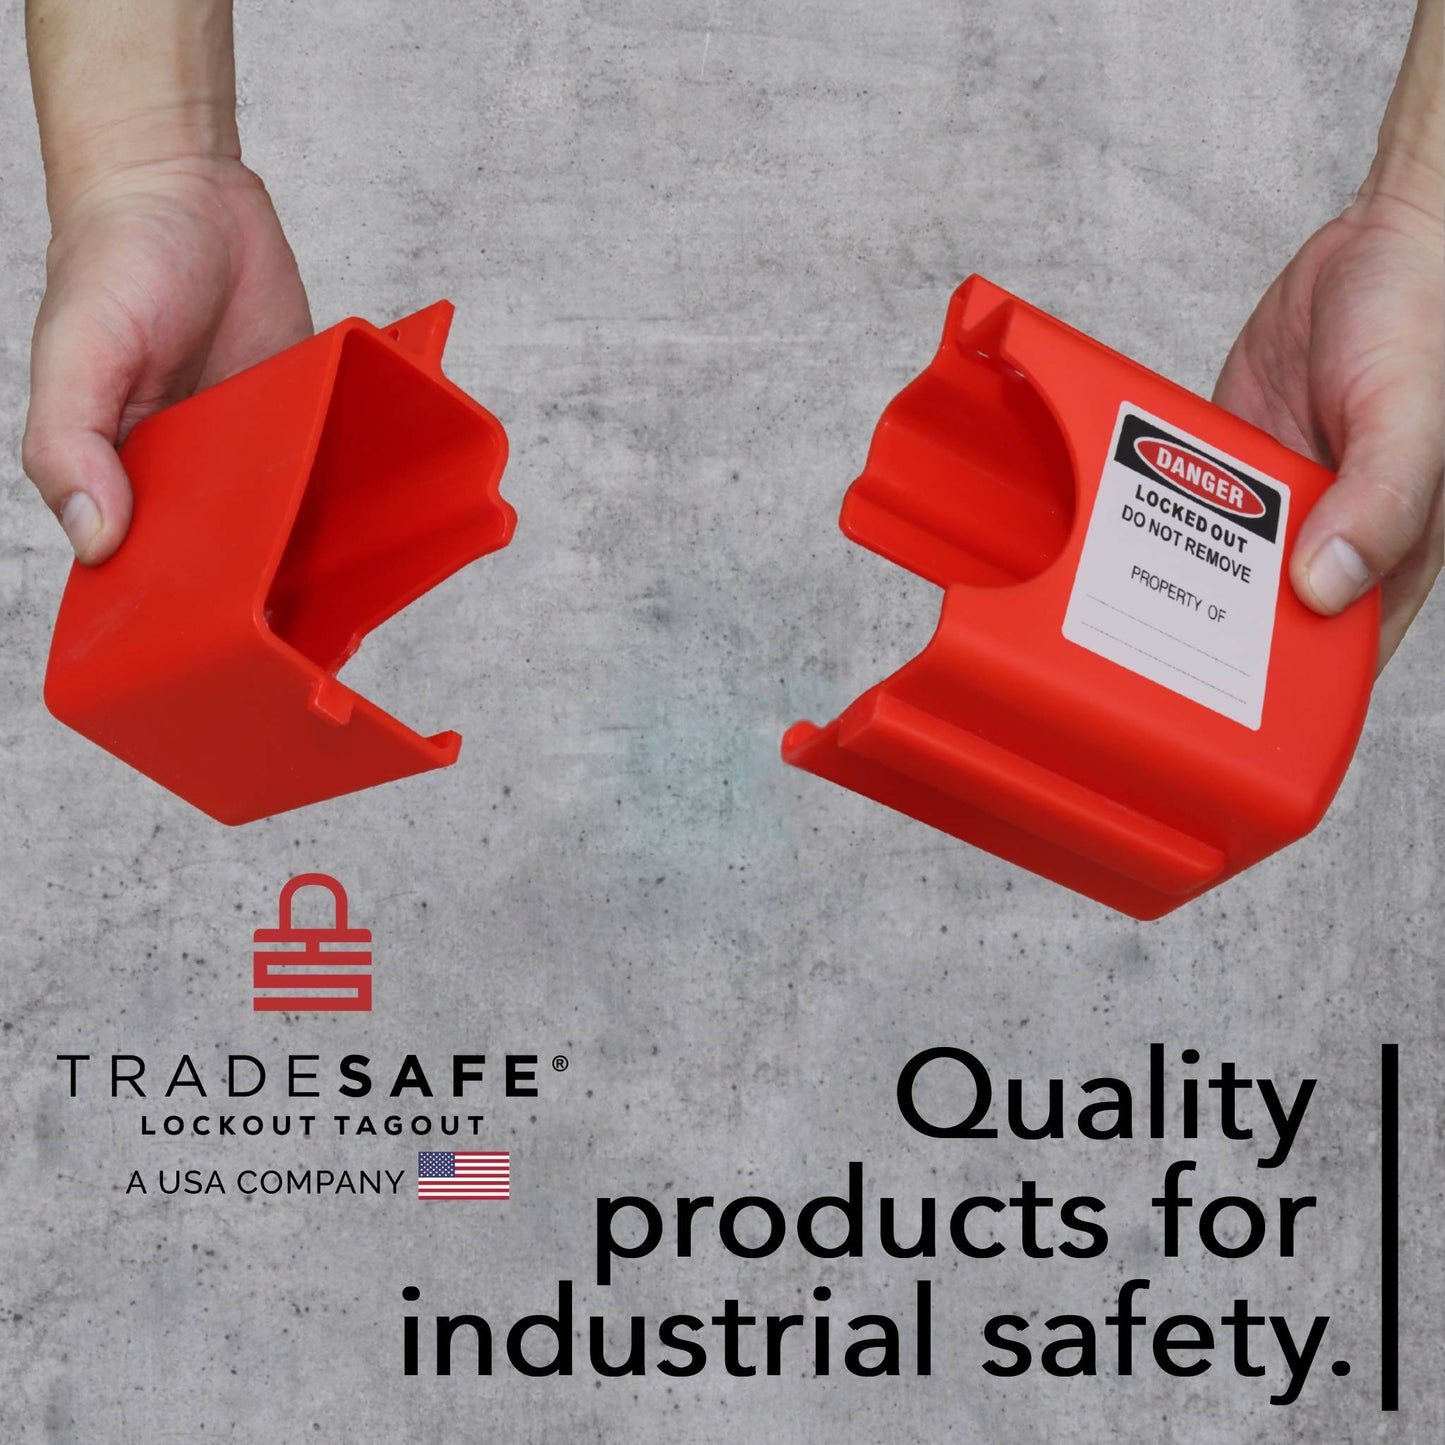 tradesafe lockout tagout adjustable flanged valve in-use with text; quality products for industrial safety